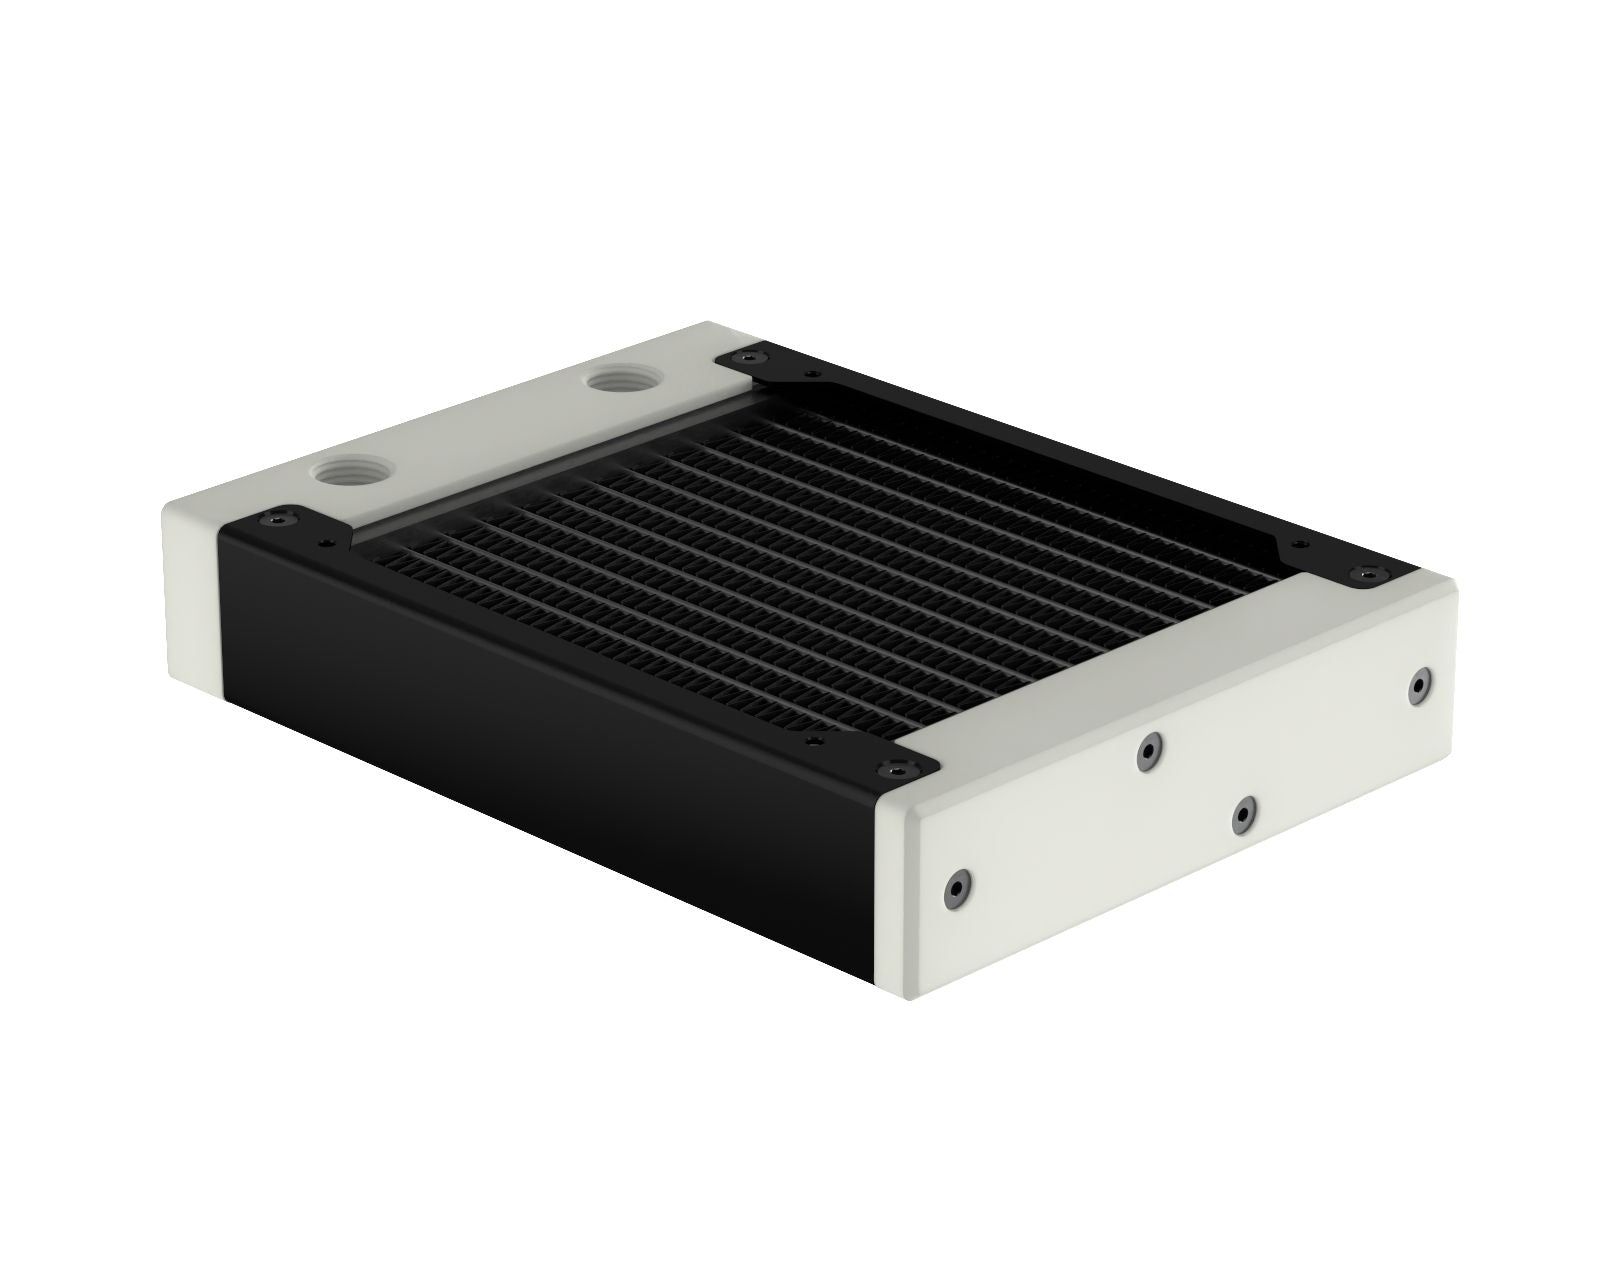 PrimoChill 120SL (30mm) EXIMO Modular Radiator, White POM, 1x120mm, Single Fan (R-SL-W12) Available in 20+ Colors, Assembled in USA and Custom Watercooling Loop Ready - Satin Black